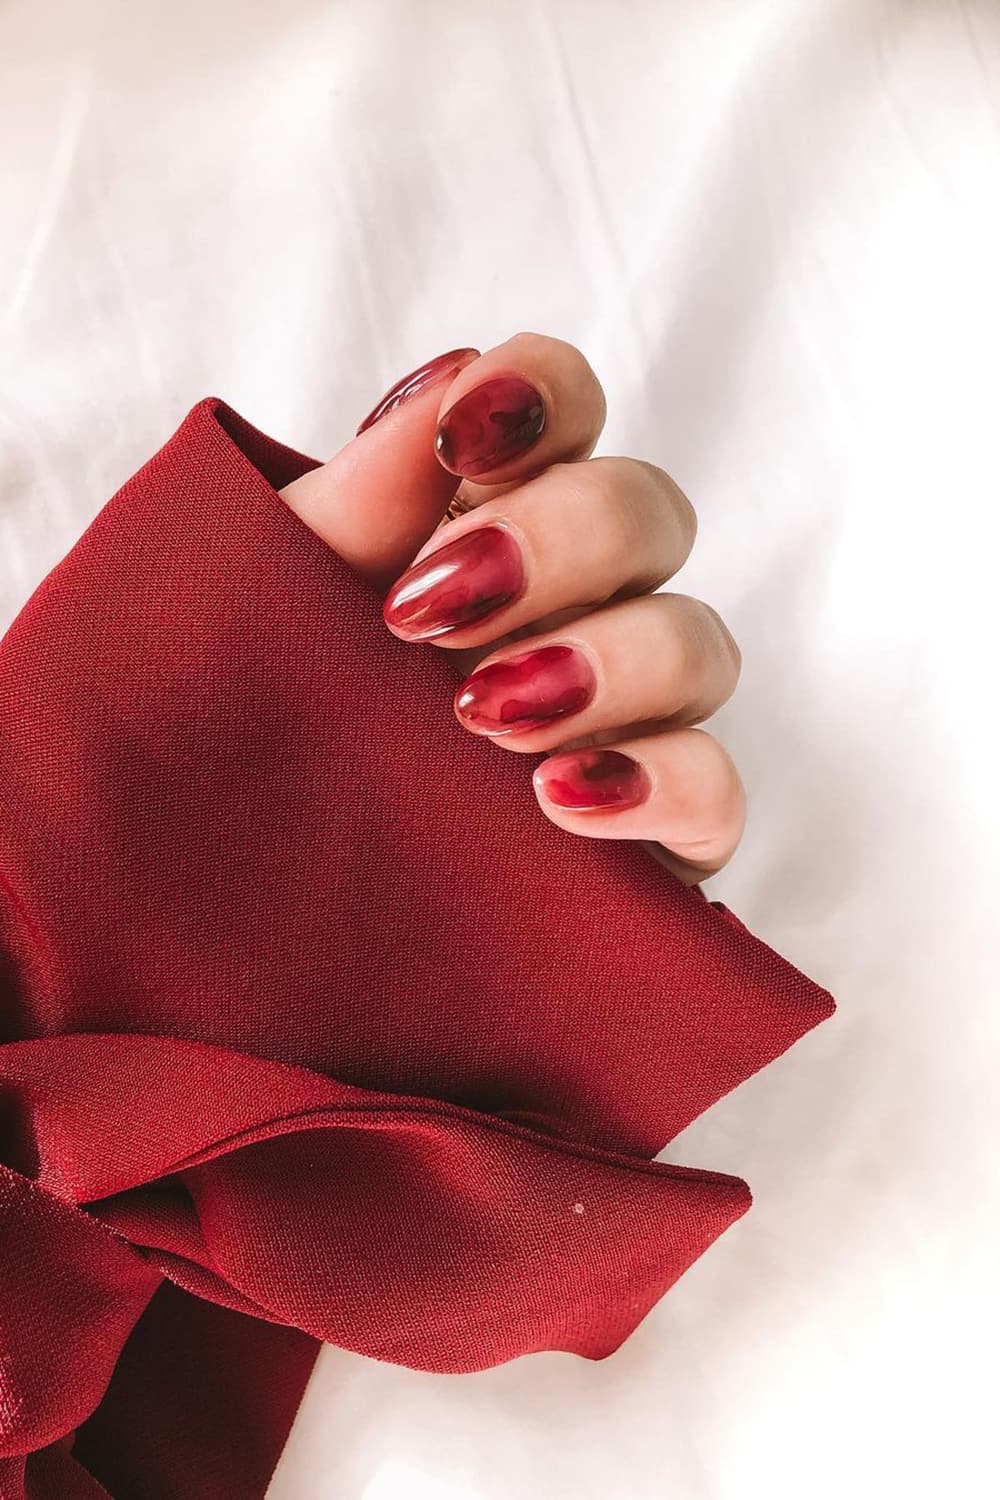 Red glass nails